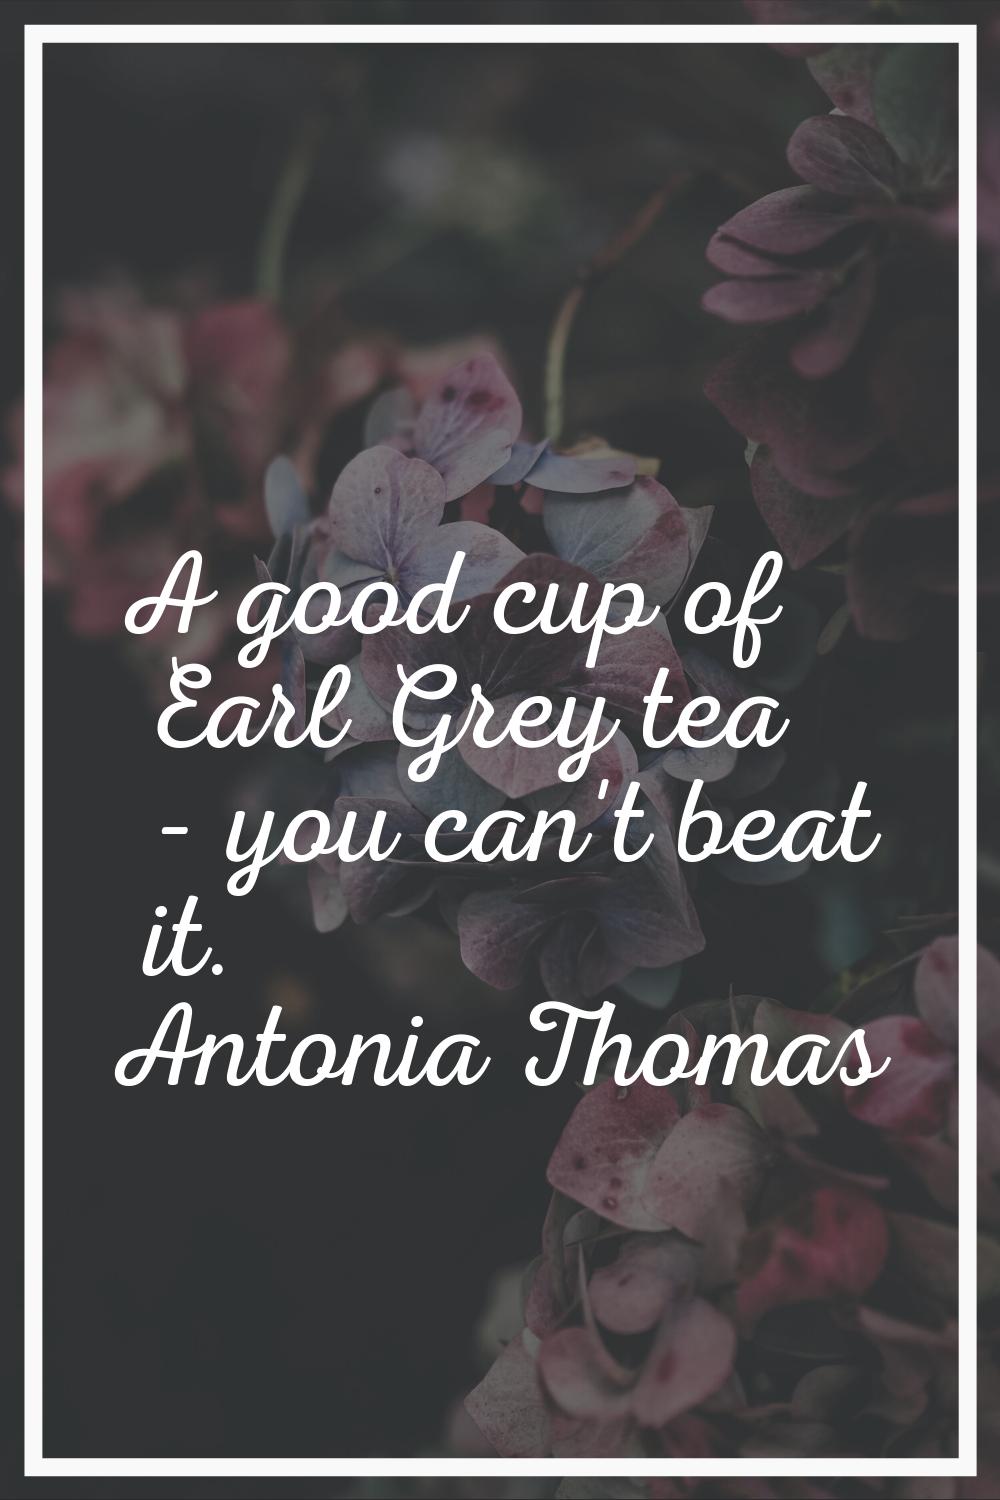 A good cup of Earl Grey tea - you can't beat it.